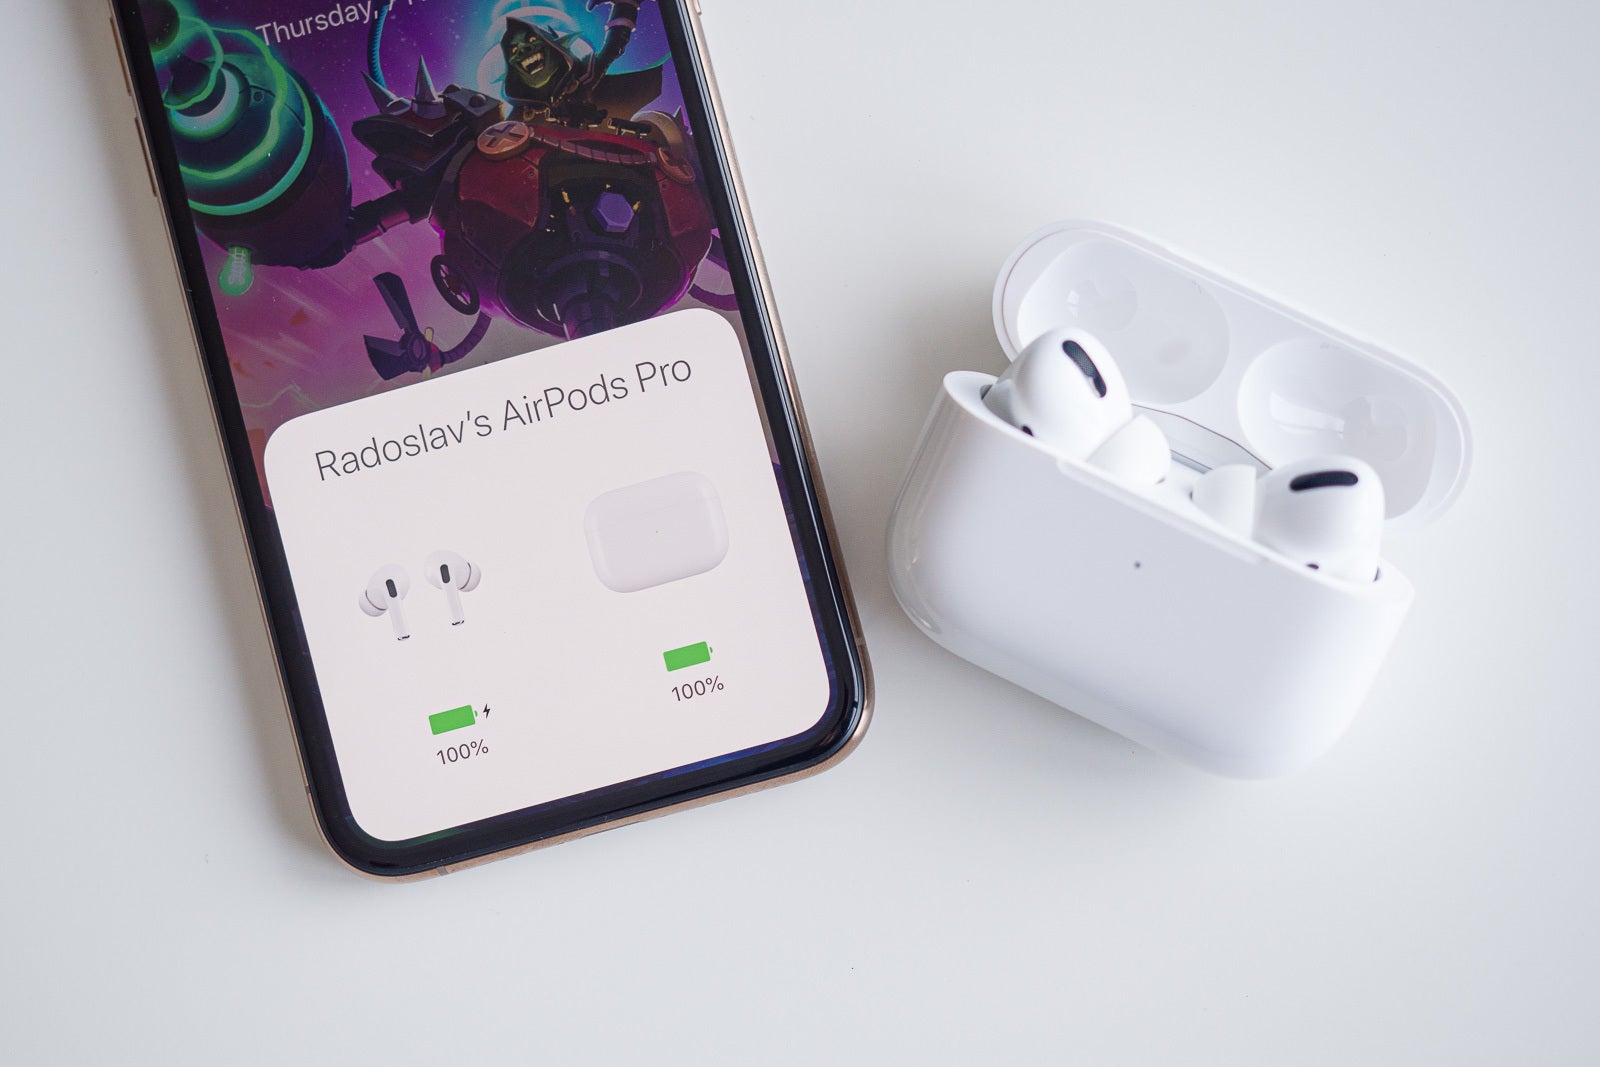 Apple AirPods Pro - Apple may launch AirTags, premium headphones, and more at WWDC 2020